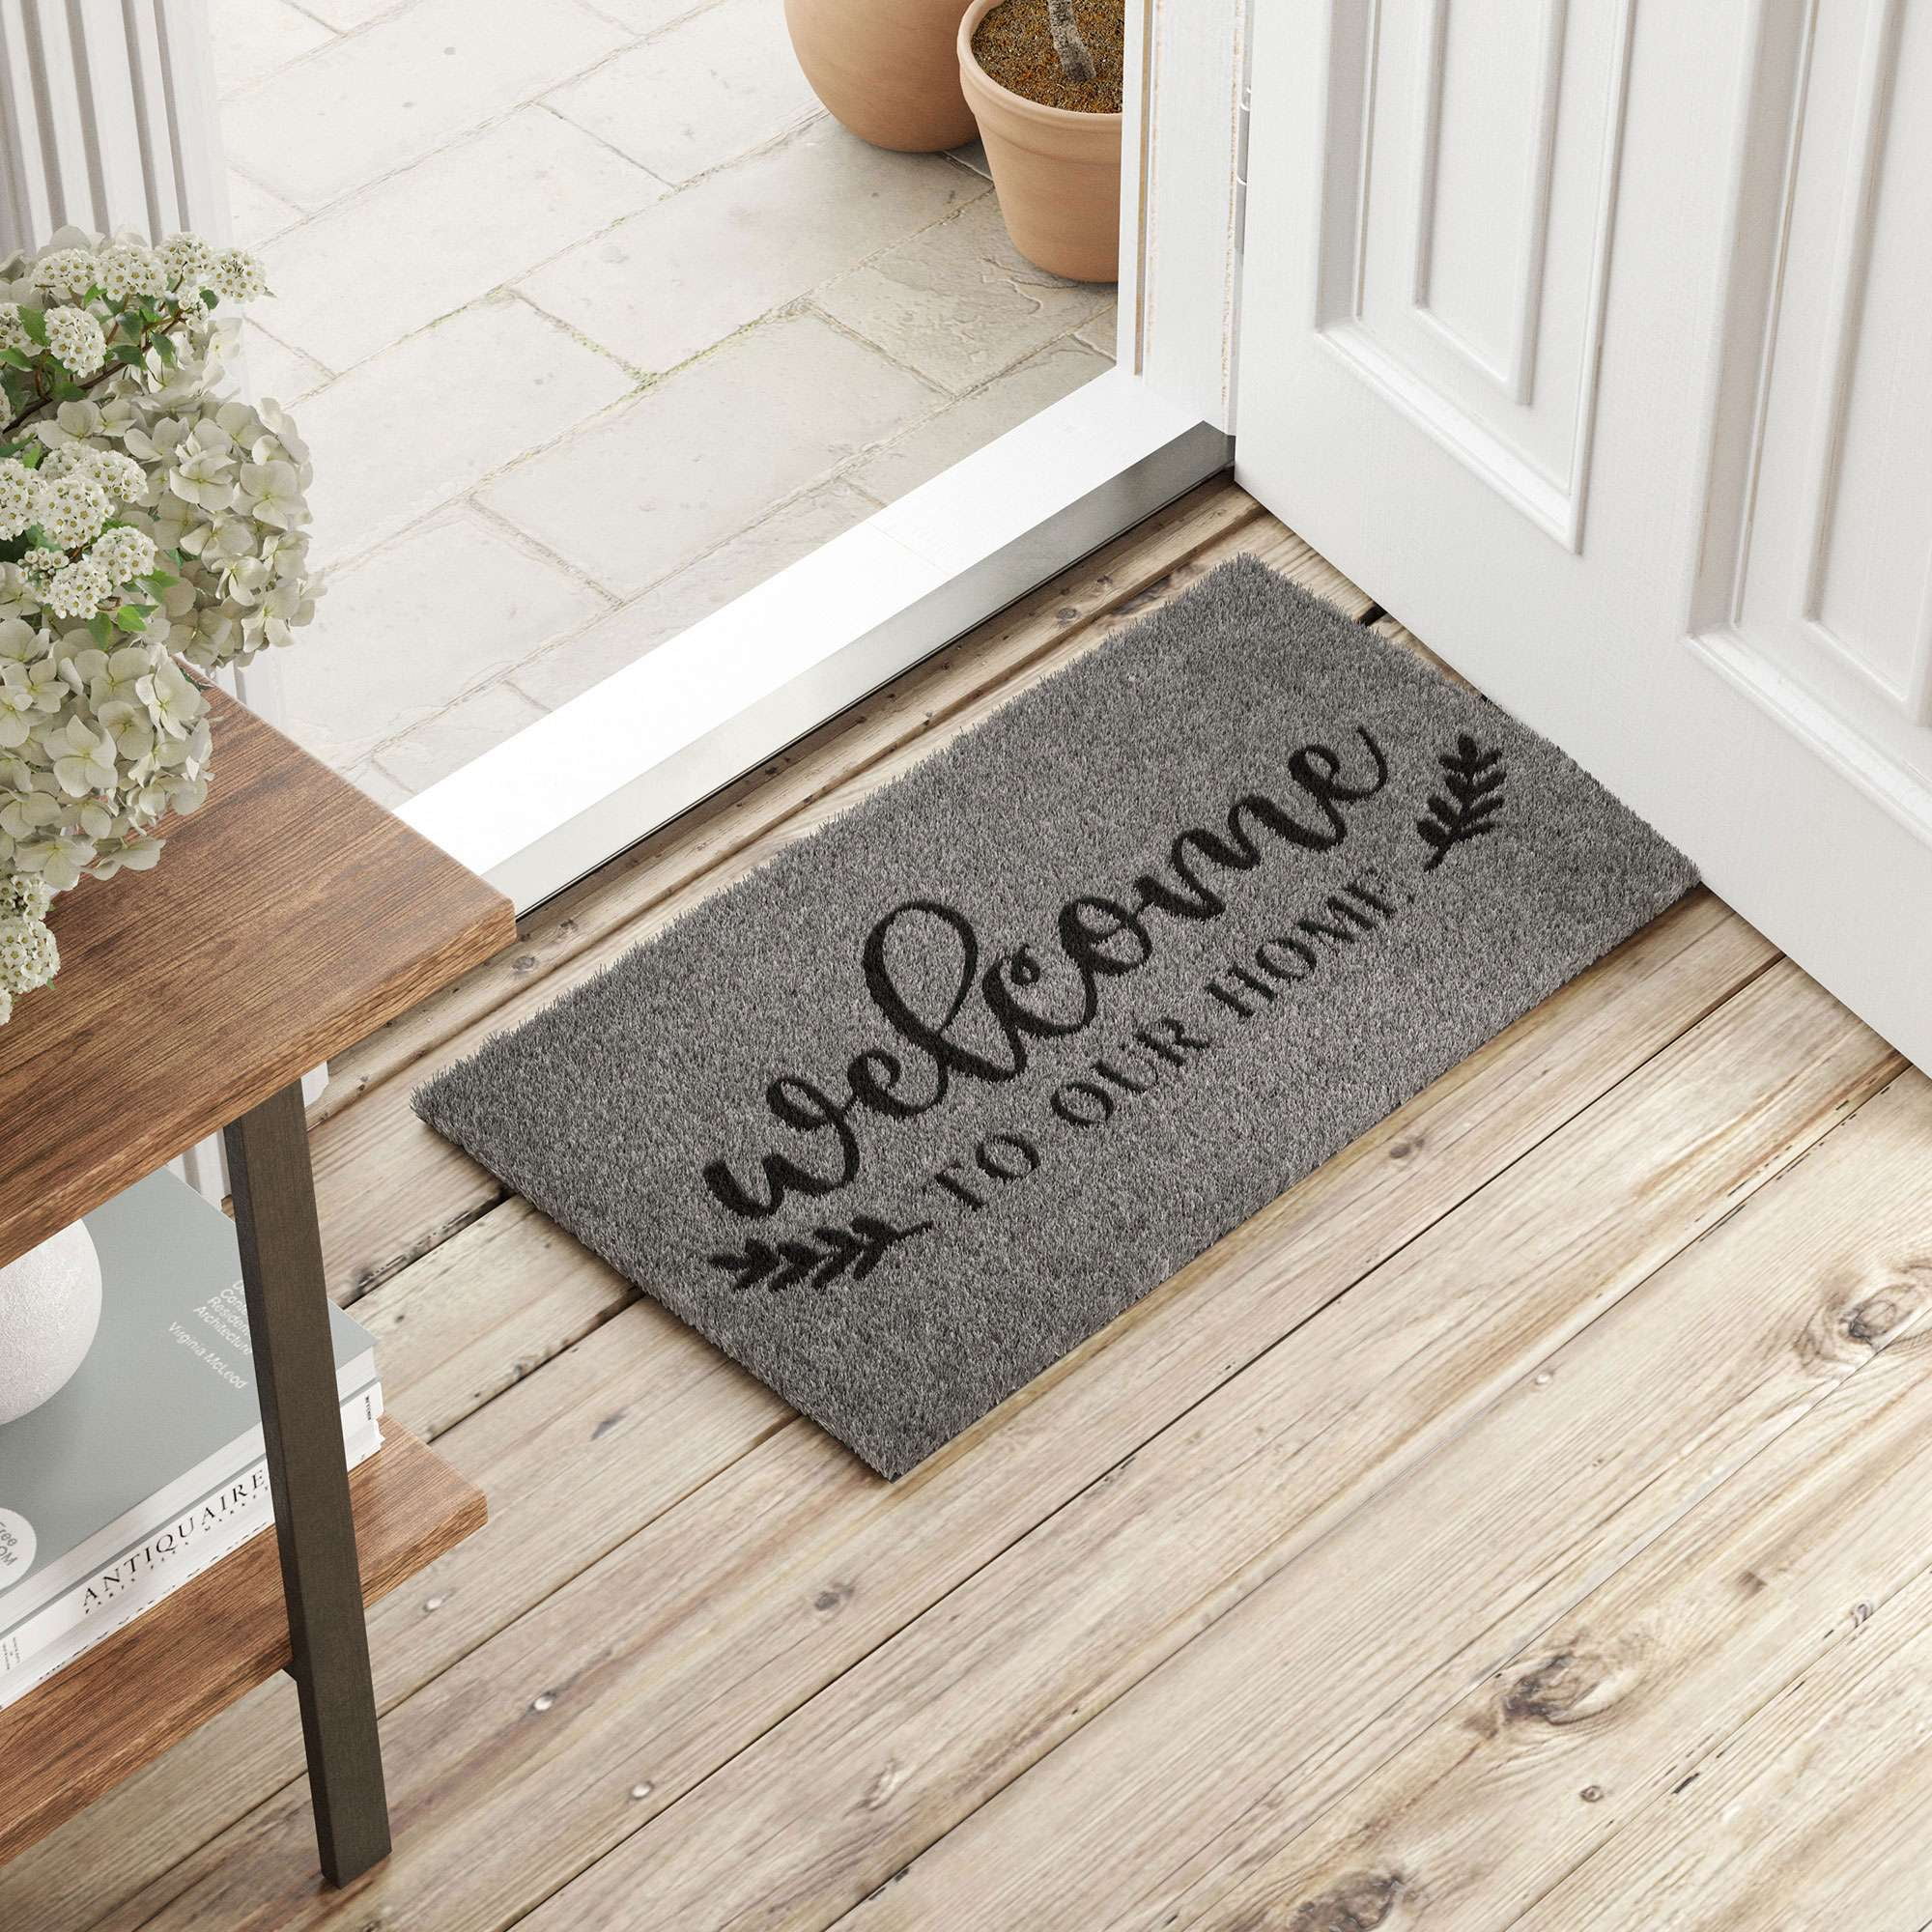 26 fun doormat ideas for your home